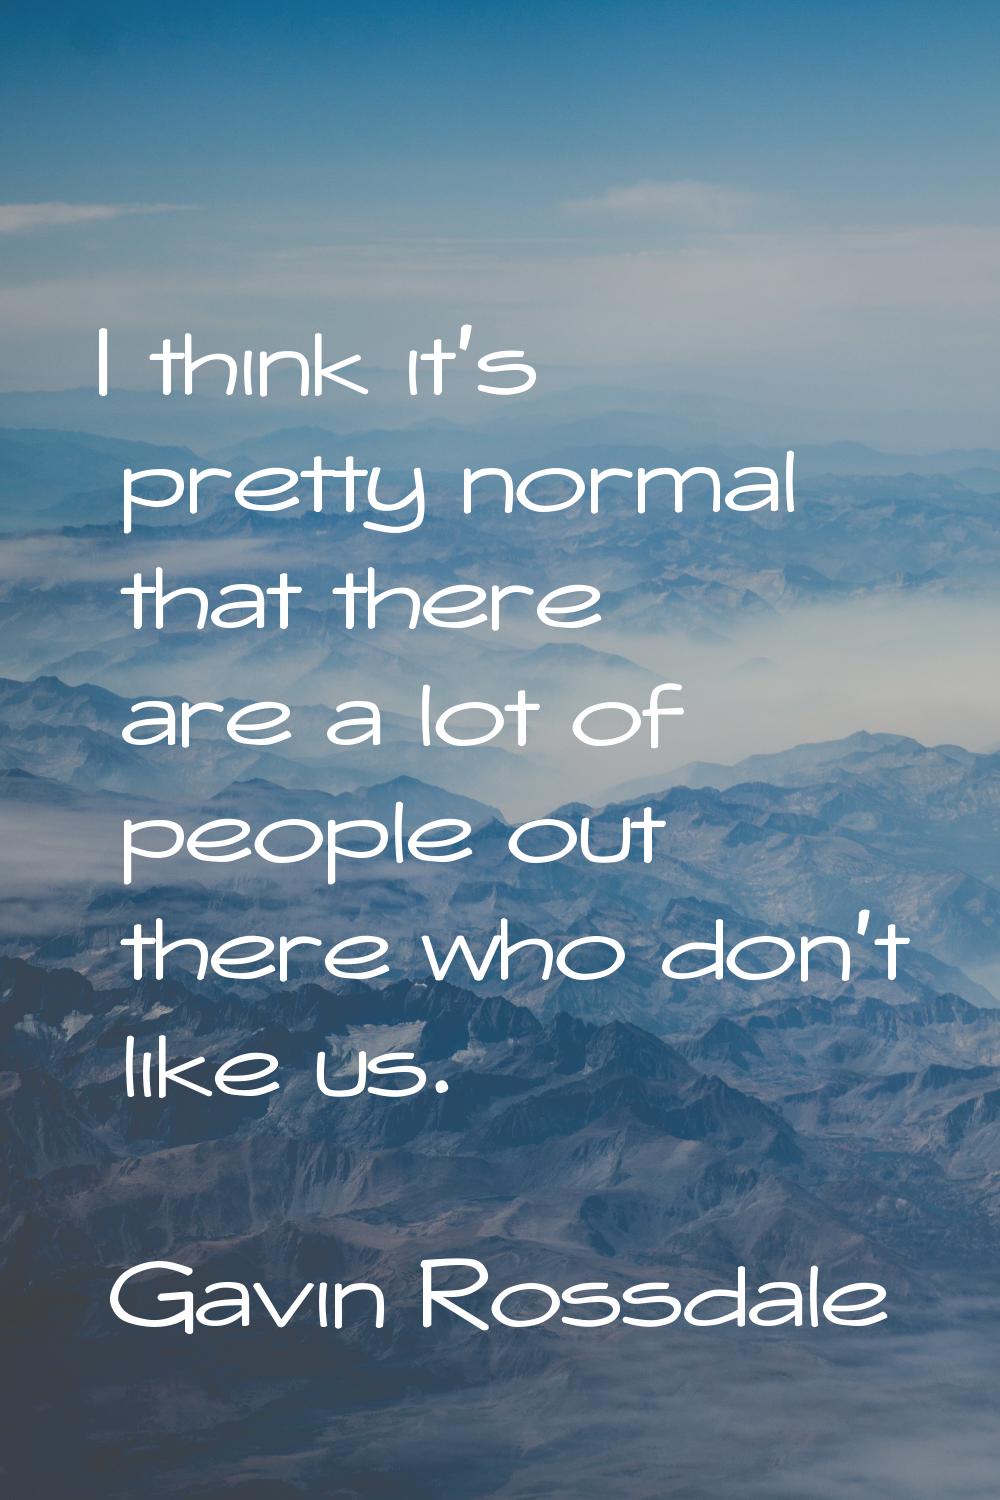 I think it's pretty normal that there are a lot of people out there who don't like us.